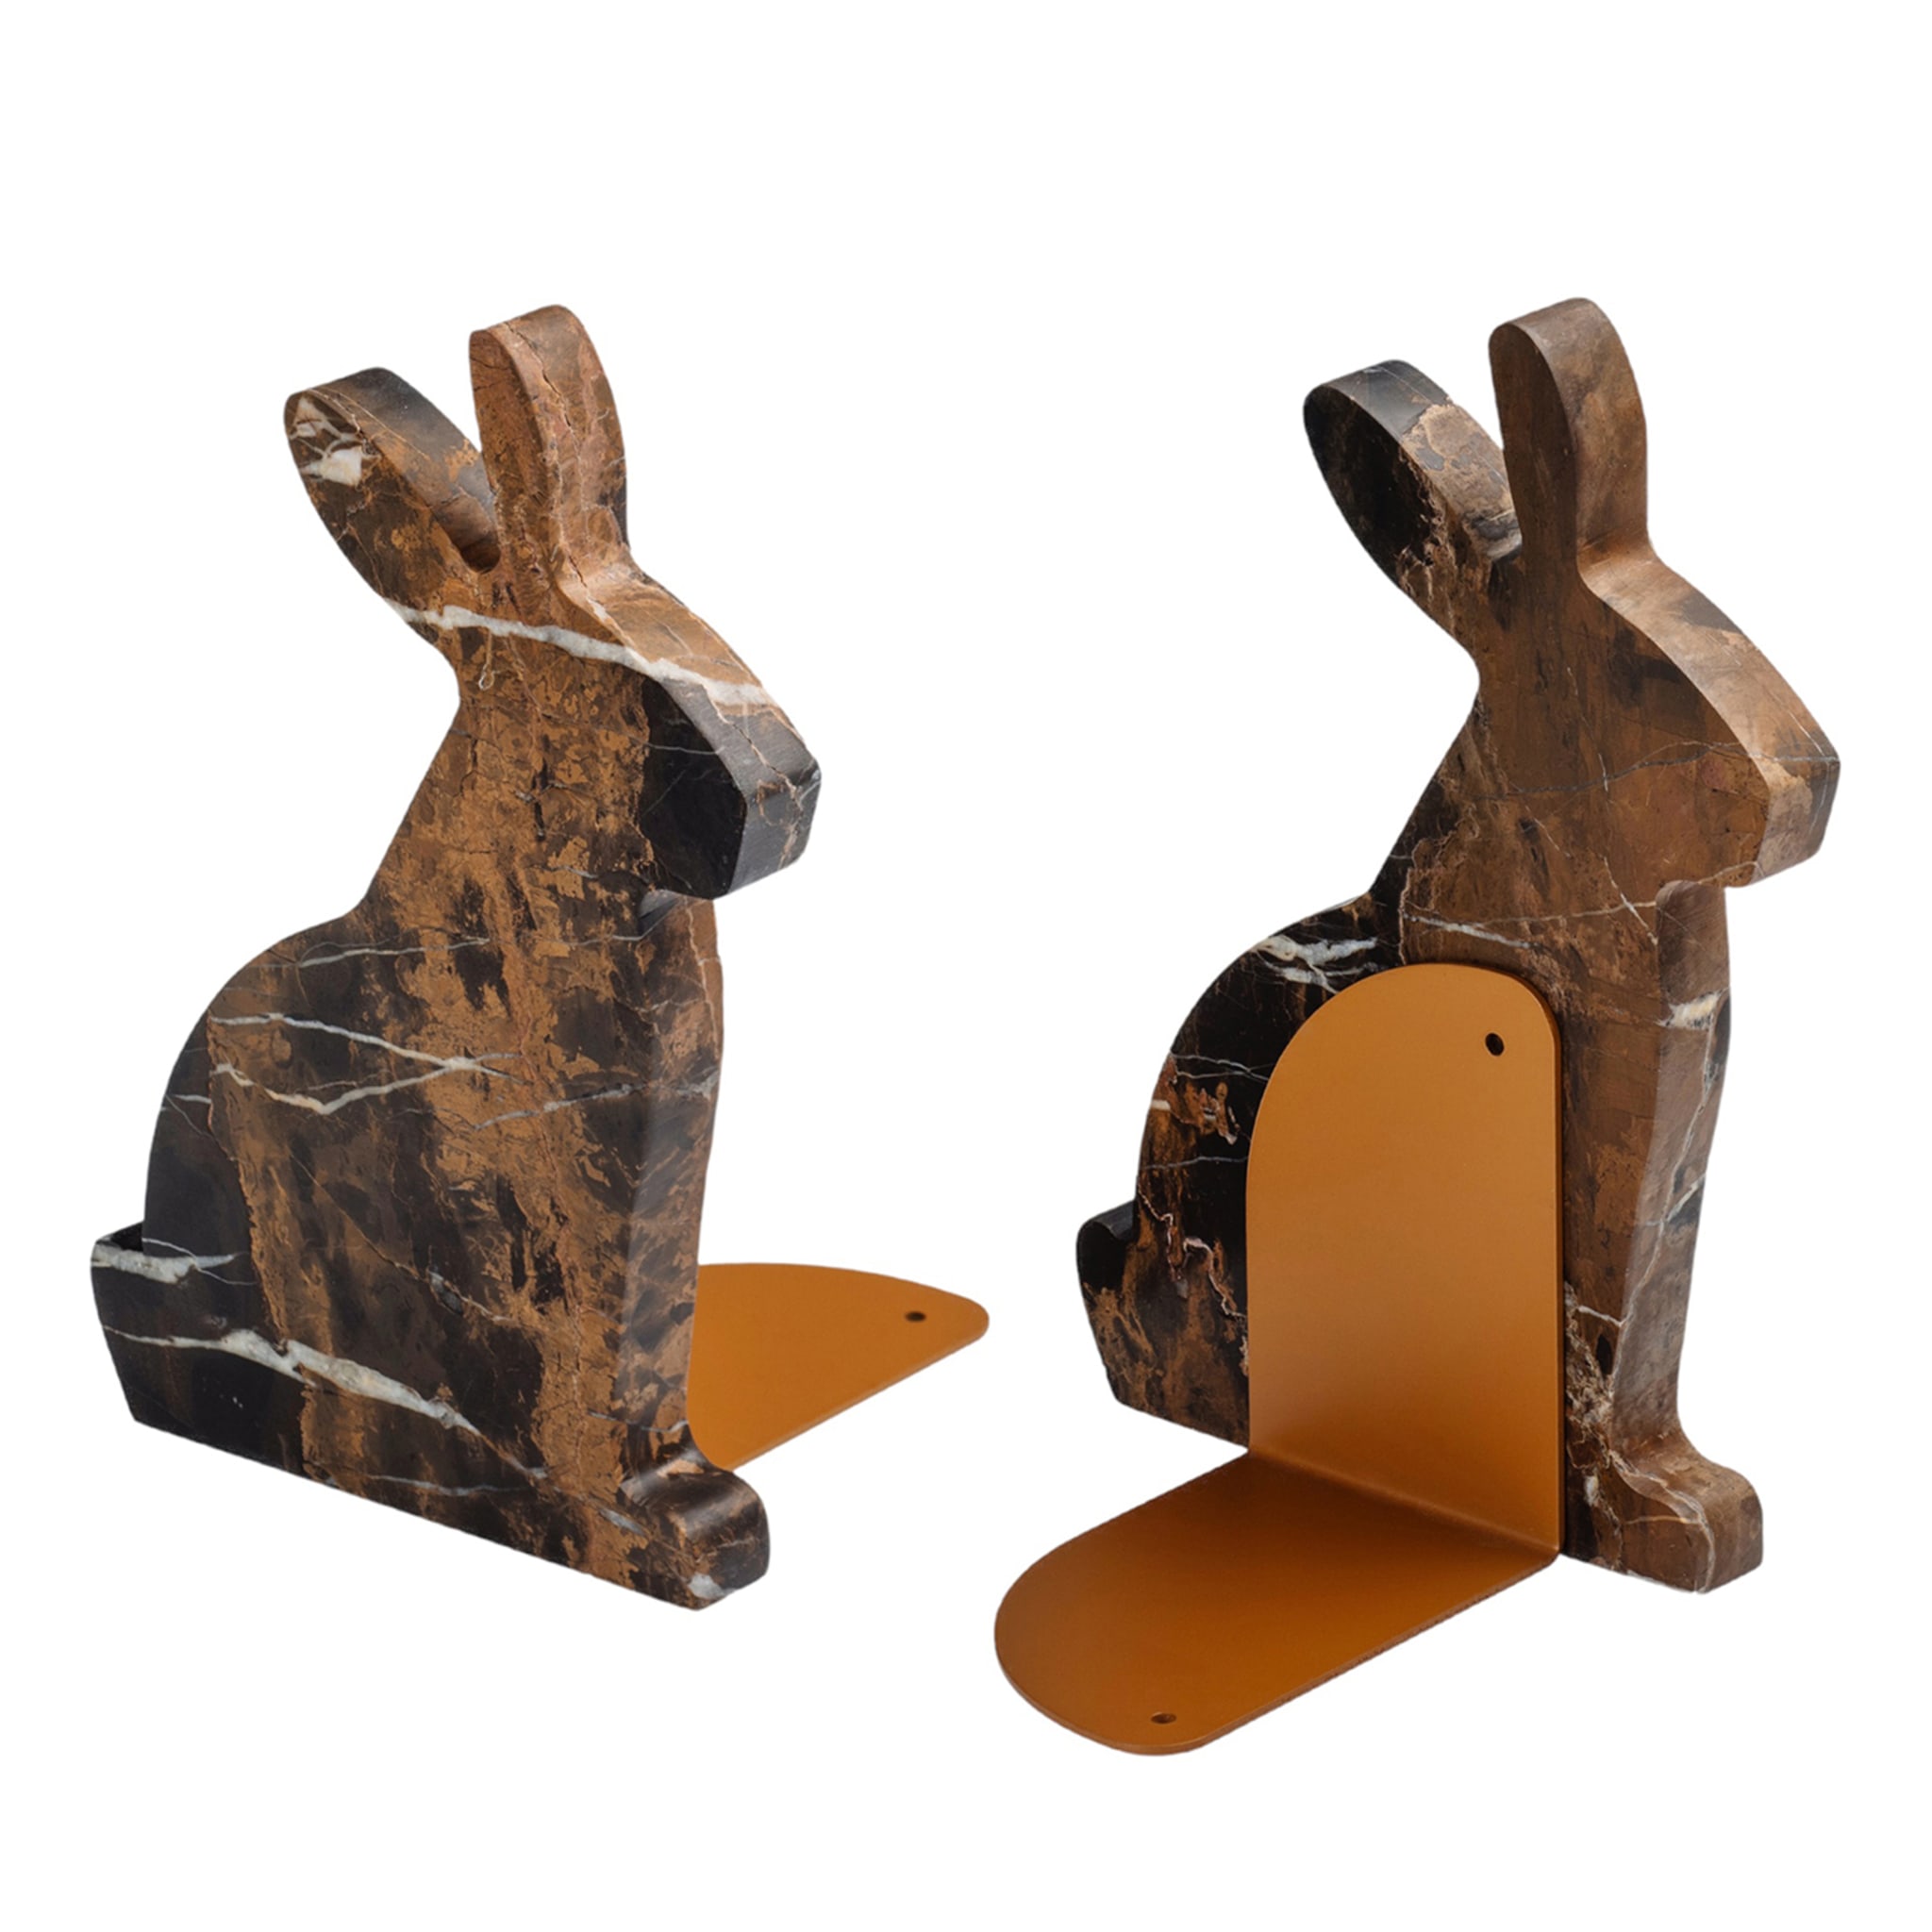 Bunny Set of 2 Black & Gold Bookends by Alessandra Grasso - Main view